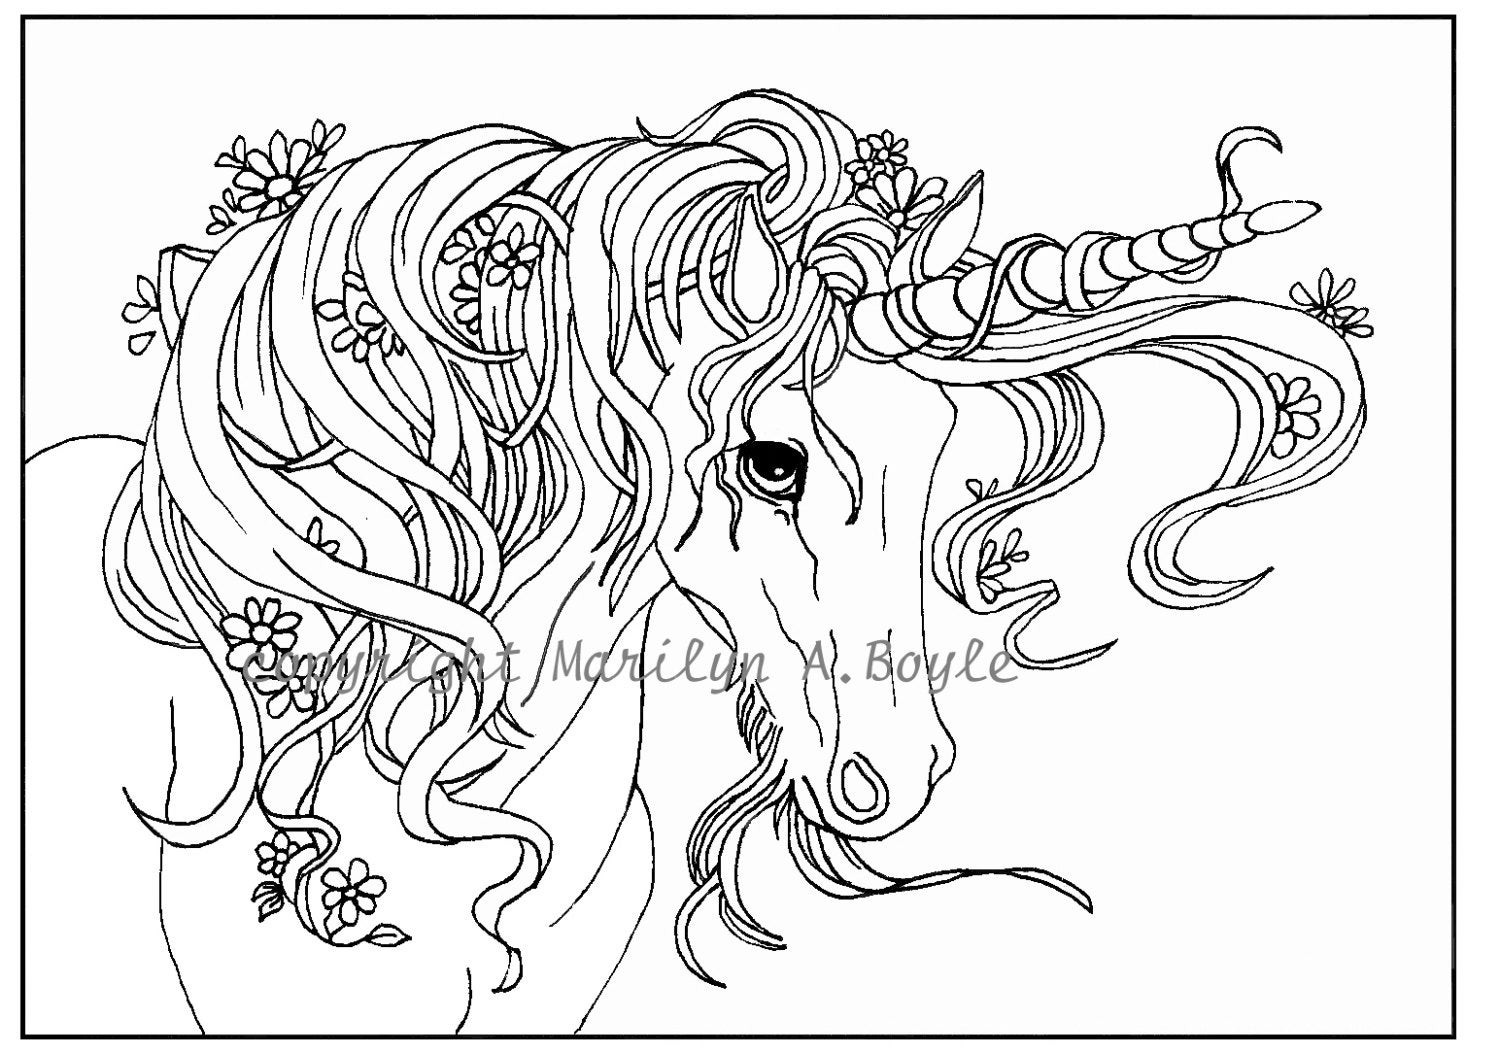 Coloring Pages For Girls Unicorns
 ADULT COLORING Page digital Unicorn flowers